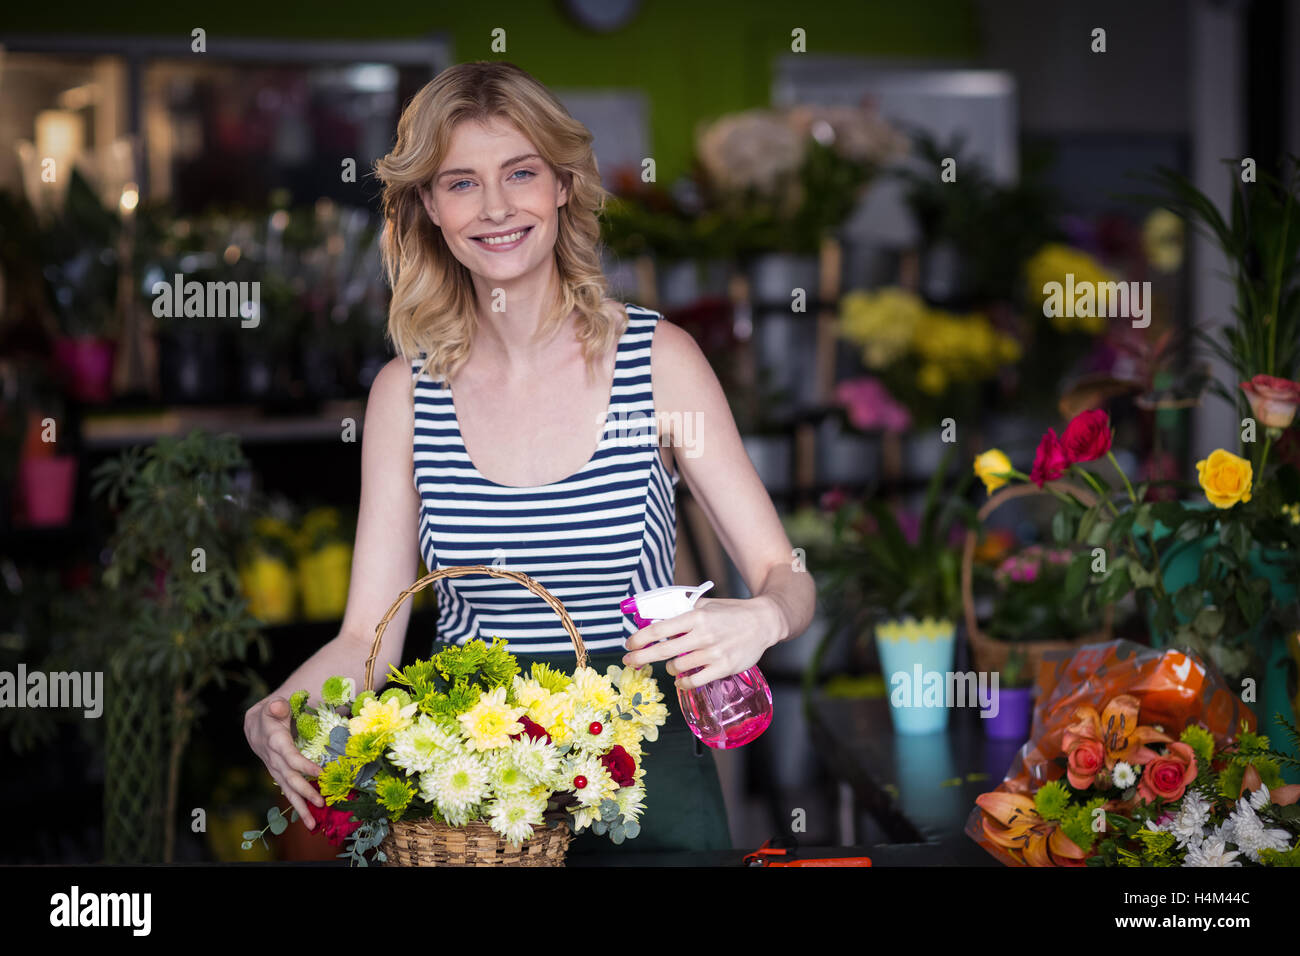 Female florists spraying water on flowers in flower shop Stock Photo